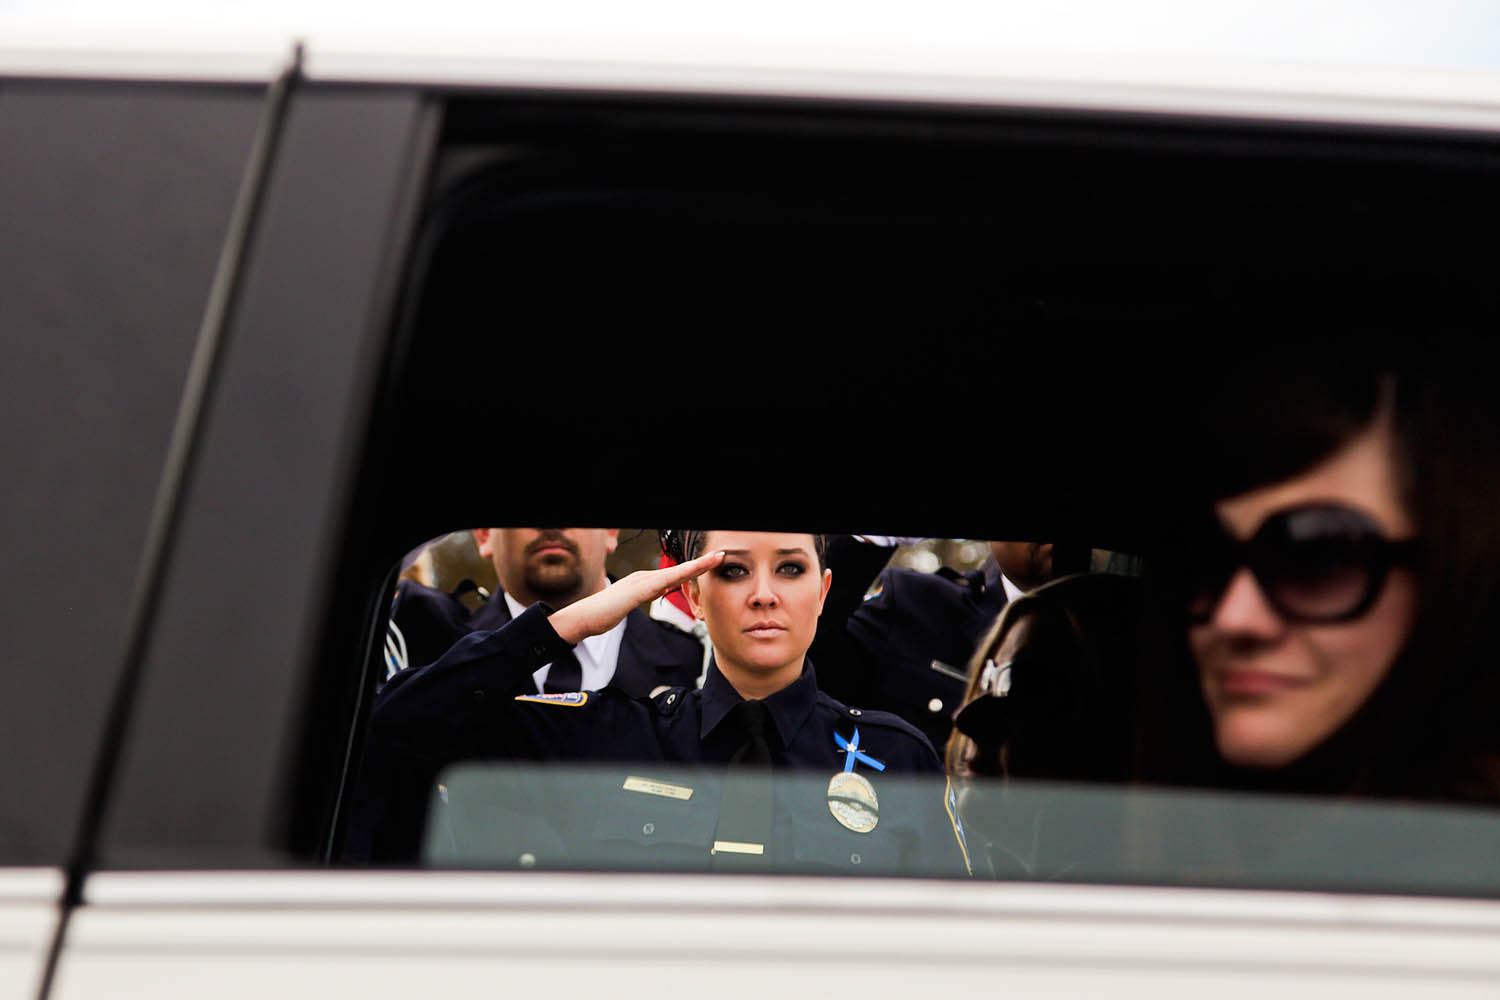 Feb. 5, 2014. A police officer, left, salutes as family members arrive before the interment ceremony for Utah County Sheriff's Sgt. Cory Wride at the Spanish Fork City Cemetery in Spanish Fork, Utah.